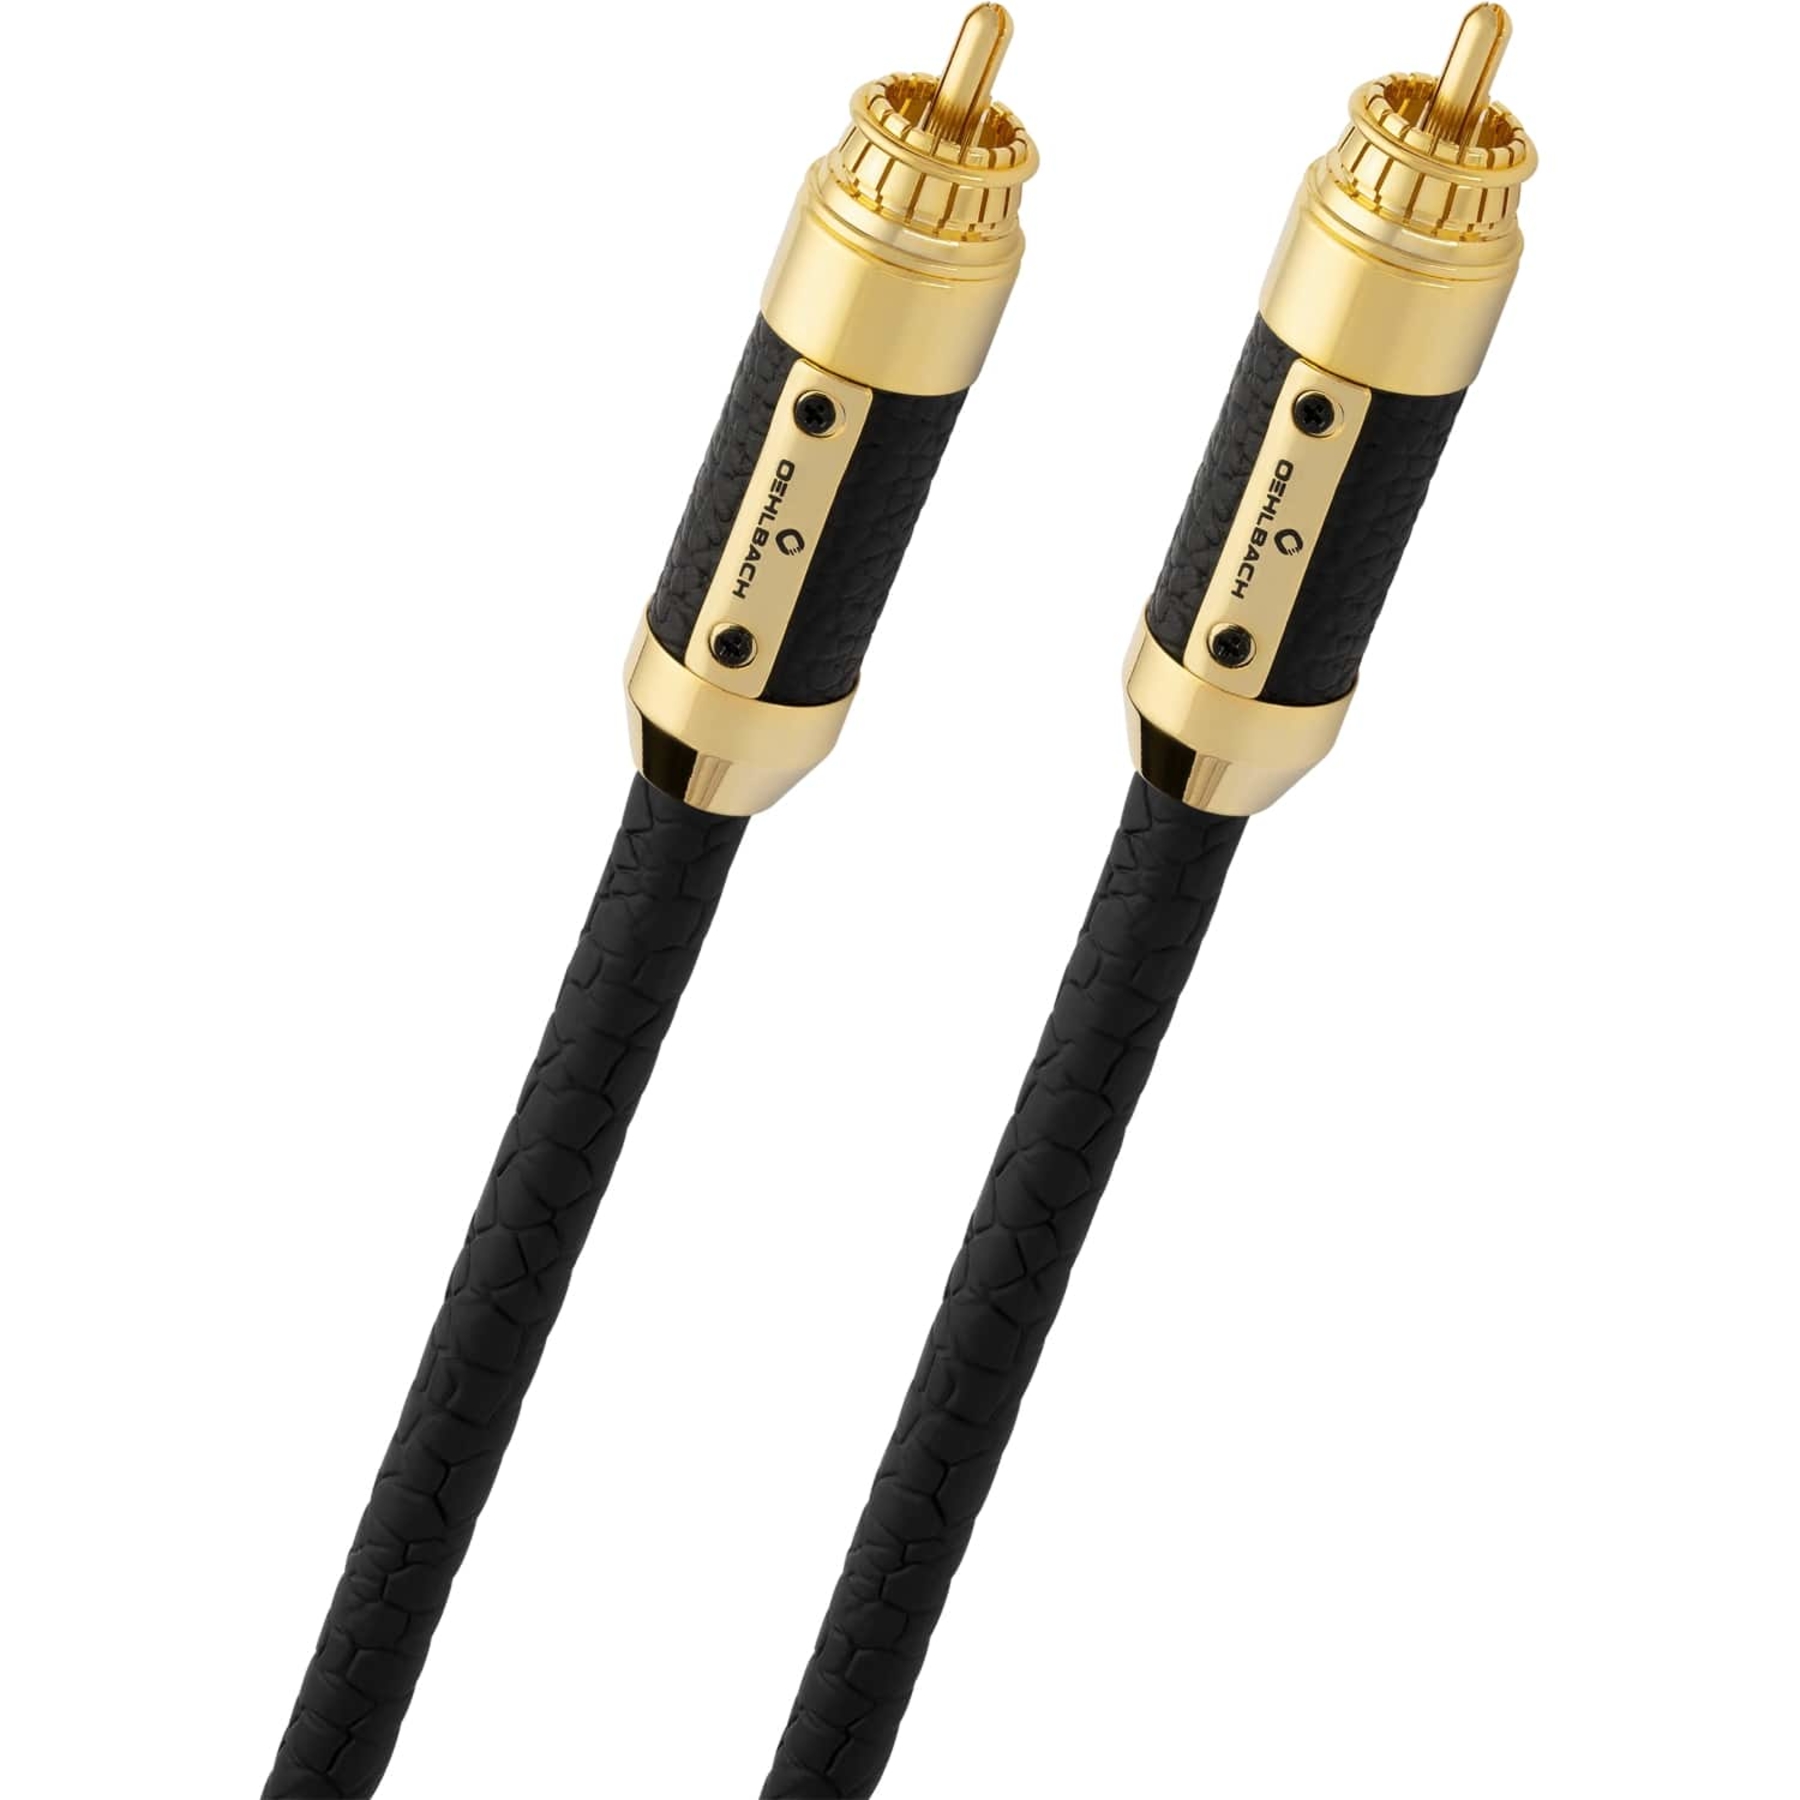 Кабели межблочные аудио Oehlbach STATE OF THE ART XXL Black Connection Cable RCA, 1x1,0m, gold, D1C13826 кабели межблочные аудио oehlbach state of the art xxl cable rca 2x1 50m gold d1c13114